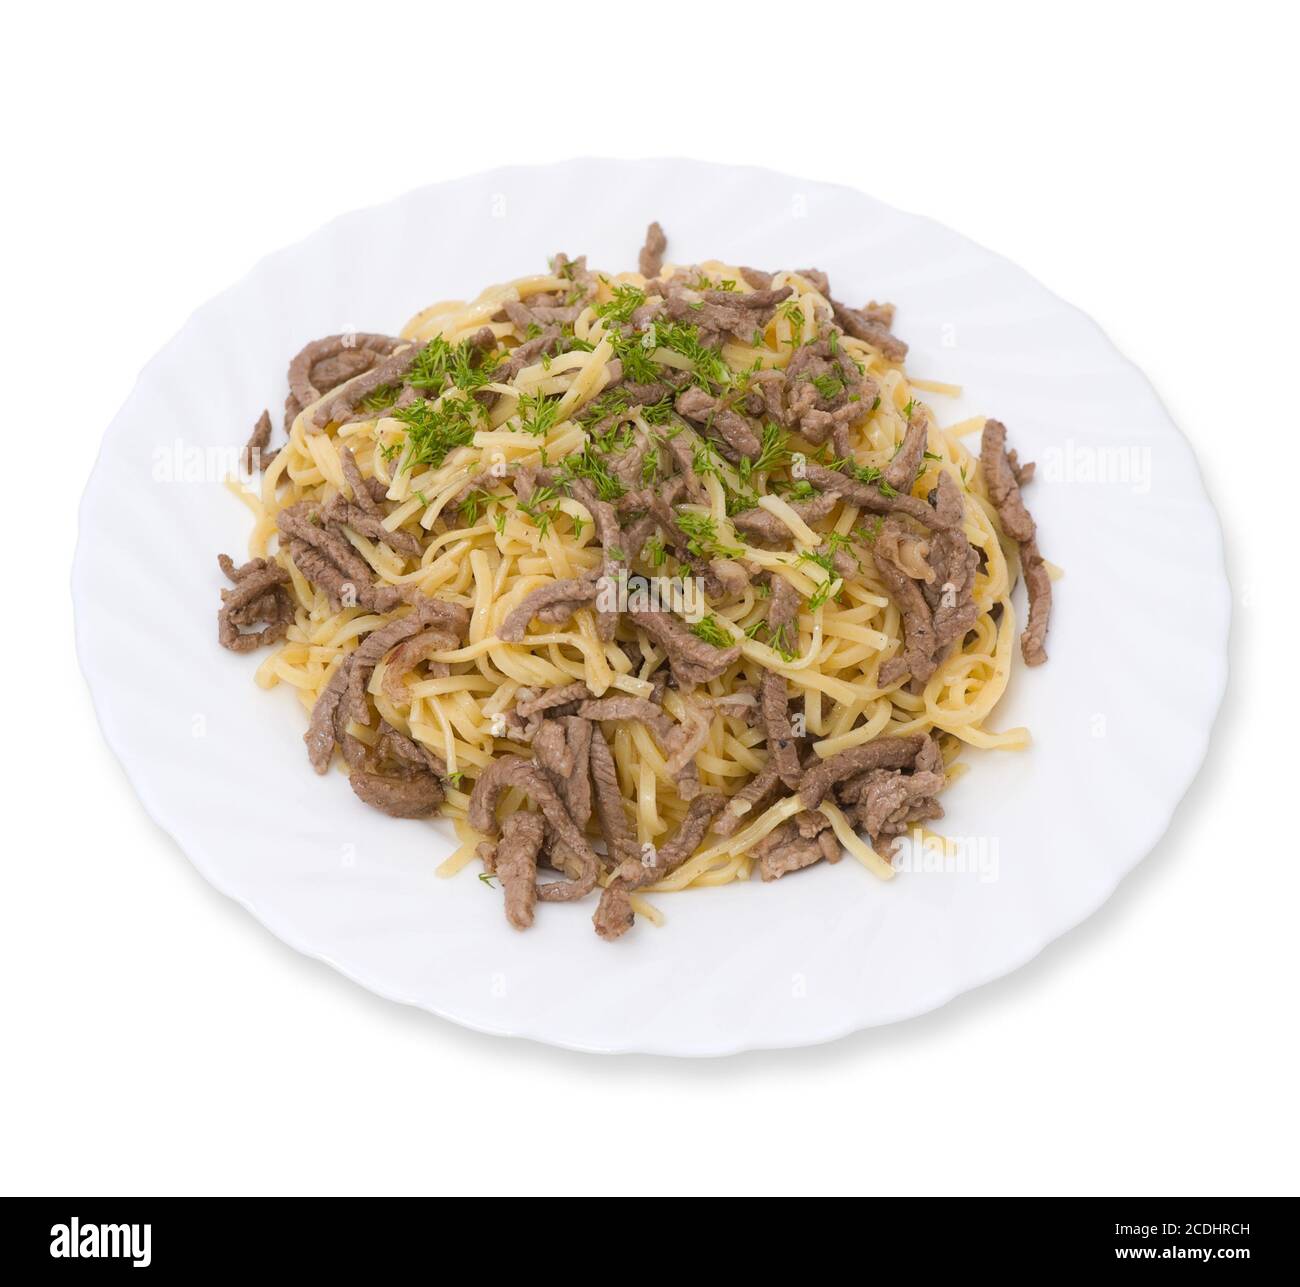 home noodles with meat Stock Photo